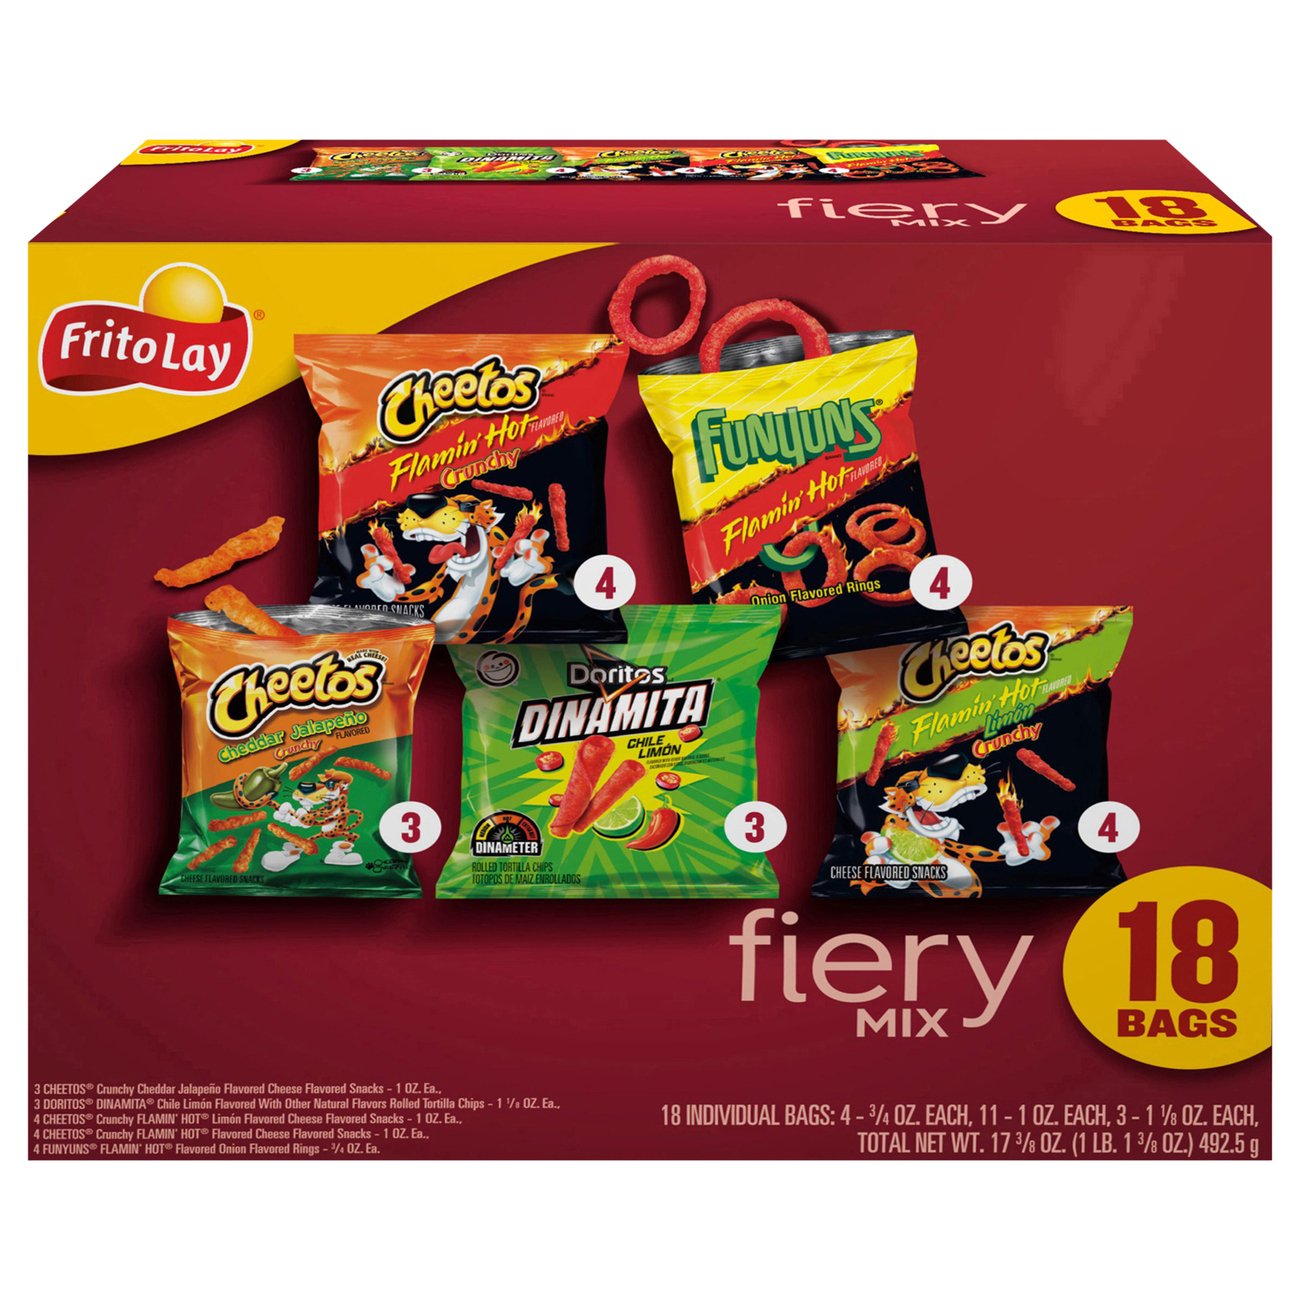 Frito Lay Fiery Mix Variety Pack Chips